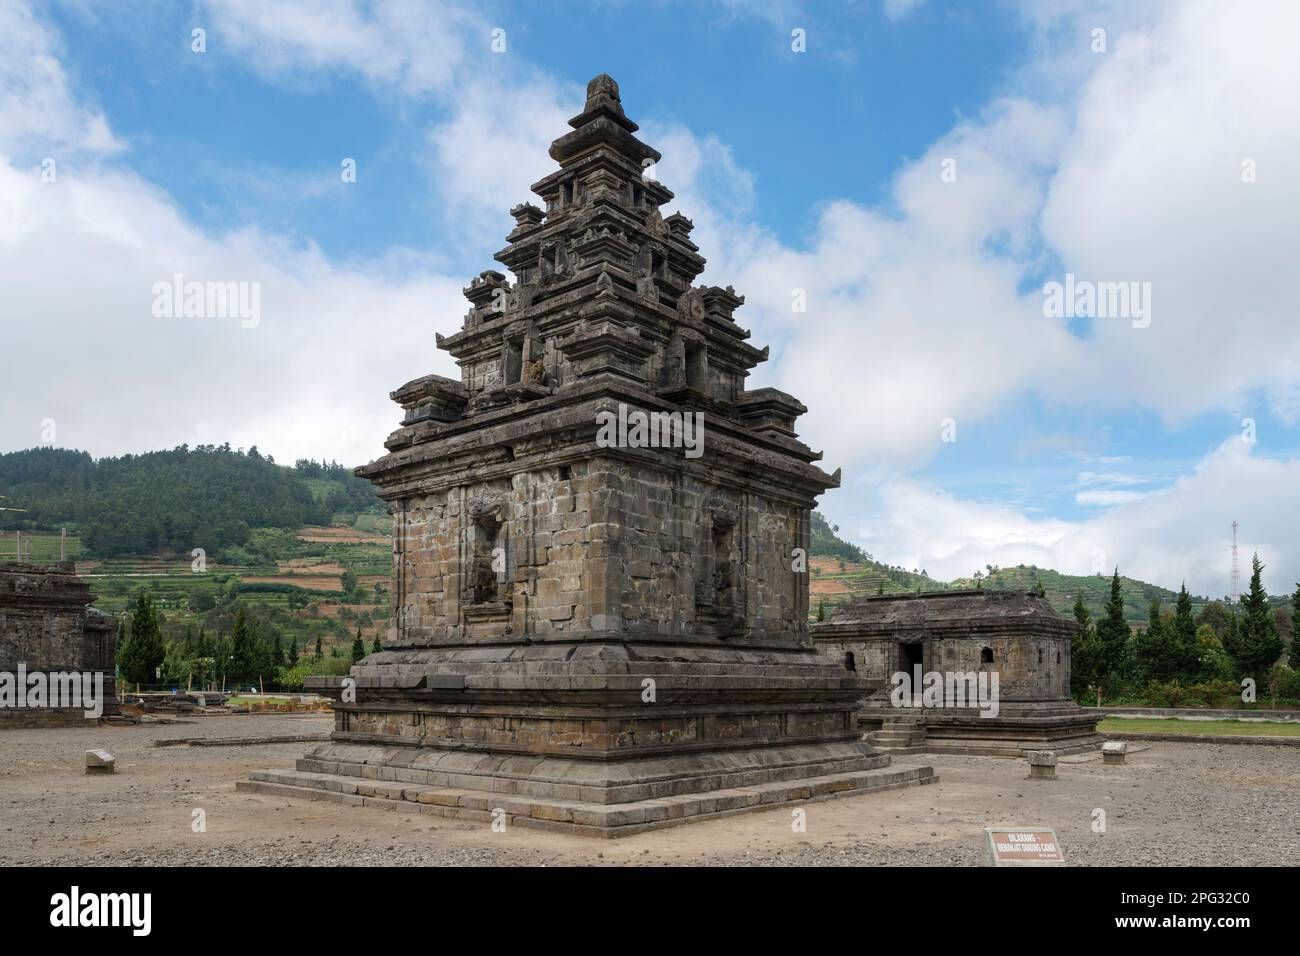 Arjuna Temple, Dieng Temples, Dieng Plateau, Central Java, Indonesia Stock Photo